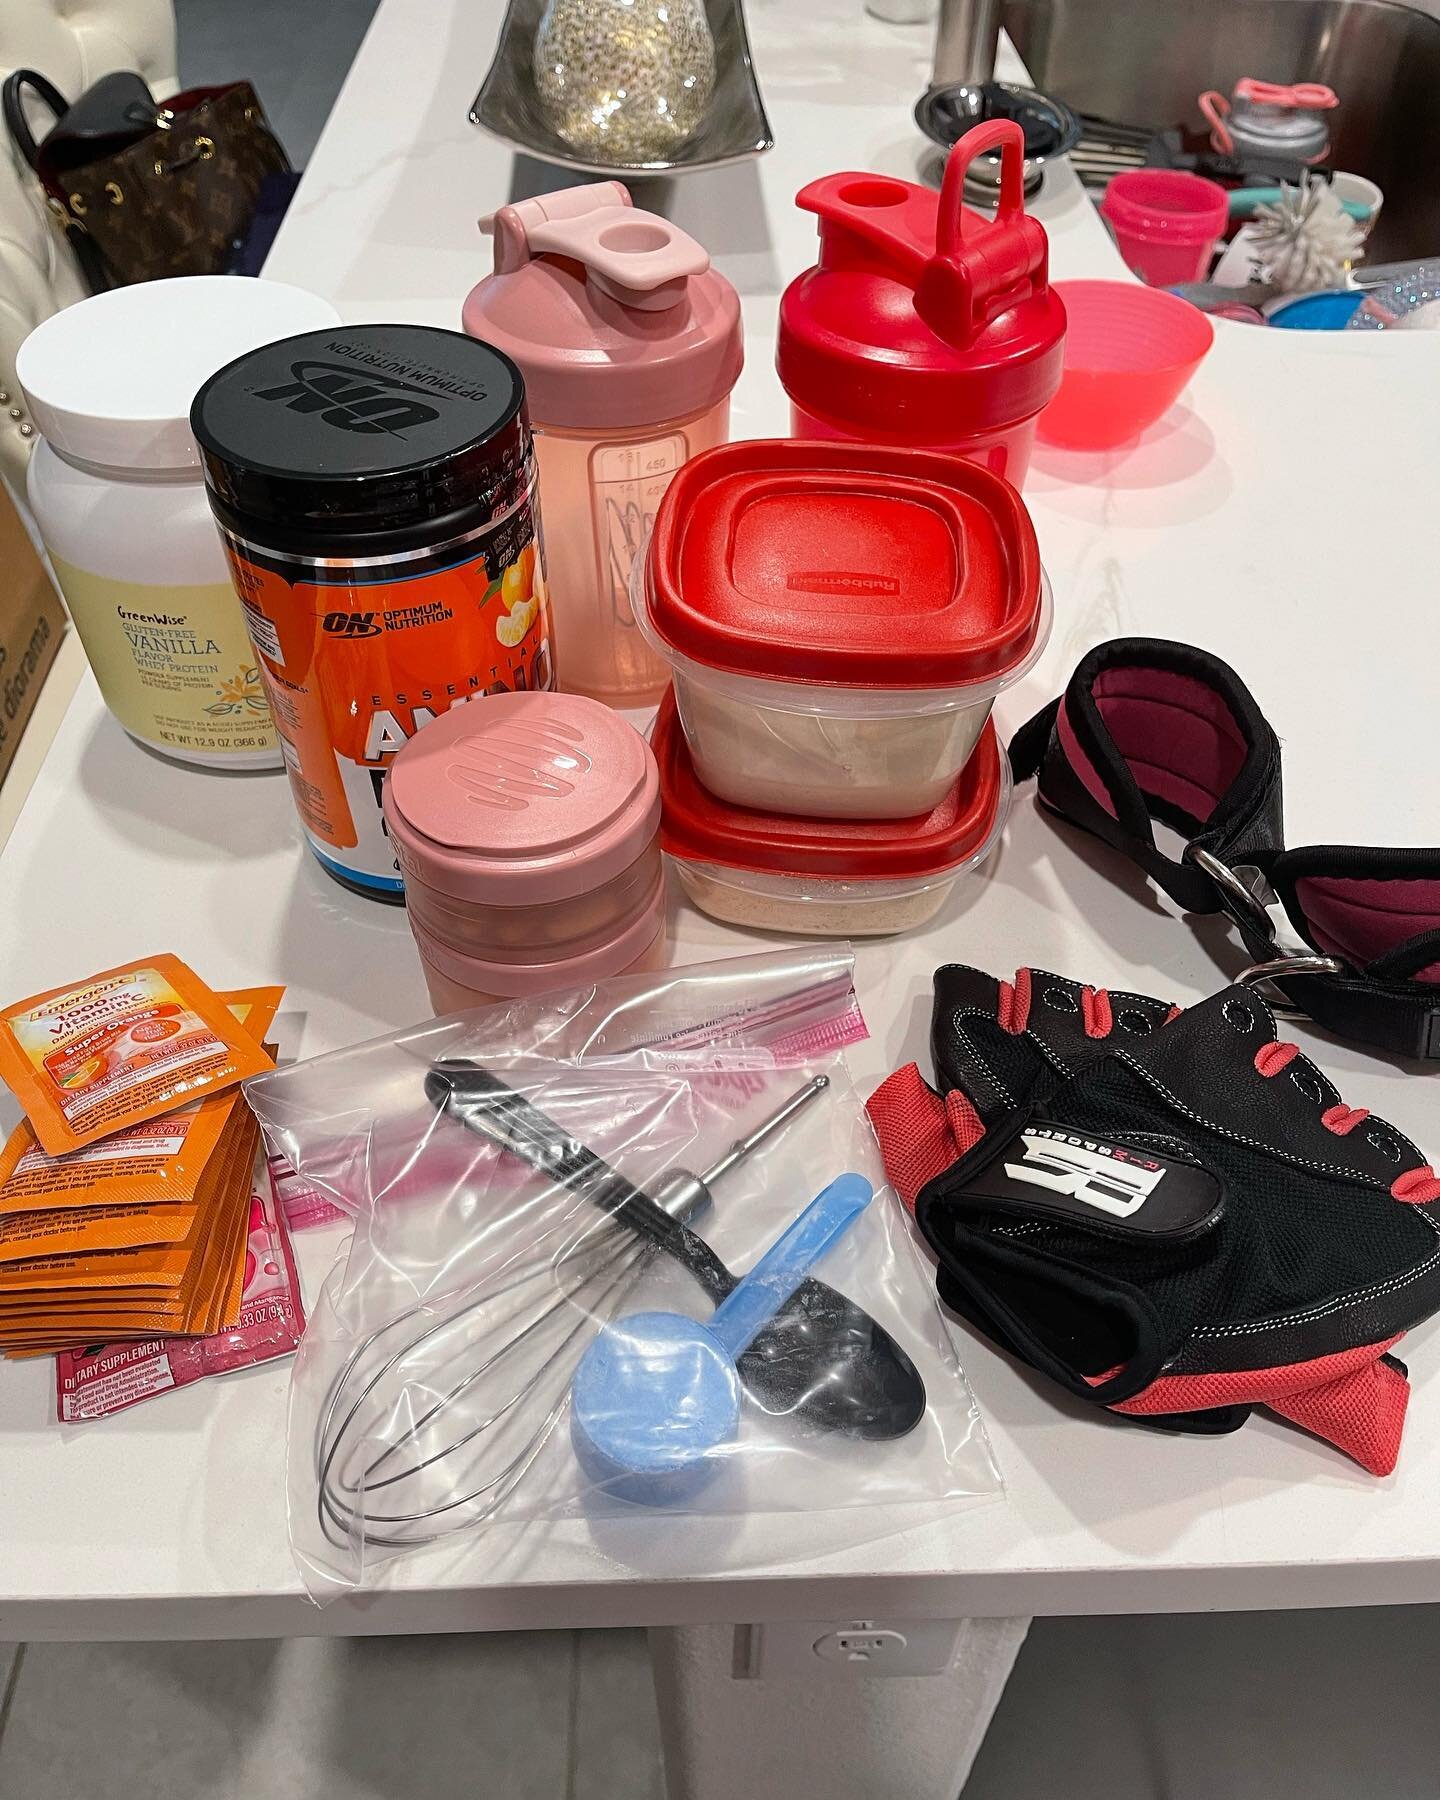 When you&rsquo;re committed to your health and more importantly, the process, packing for work trips looks a lot different and it takes more time. I said I&rsquo;m committed, so I&rsquo;m keeping my word regardless of the circumstances. #health #fitn